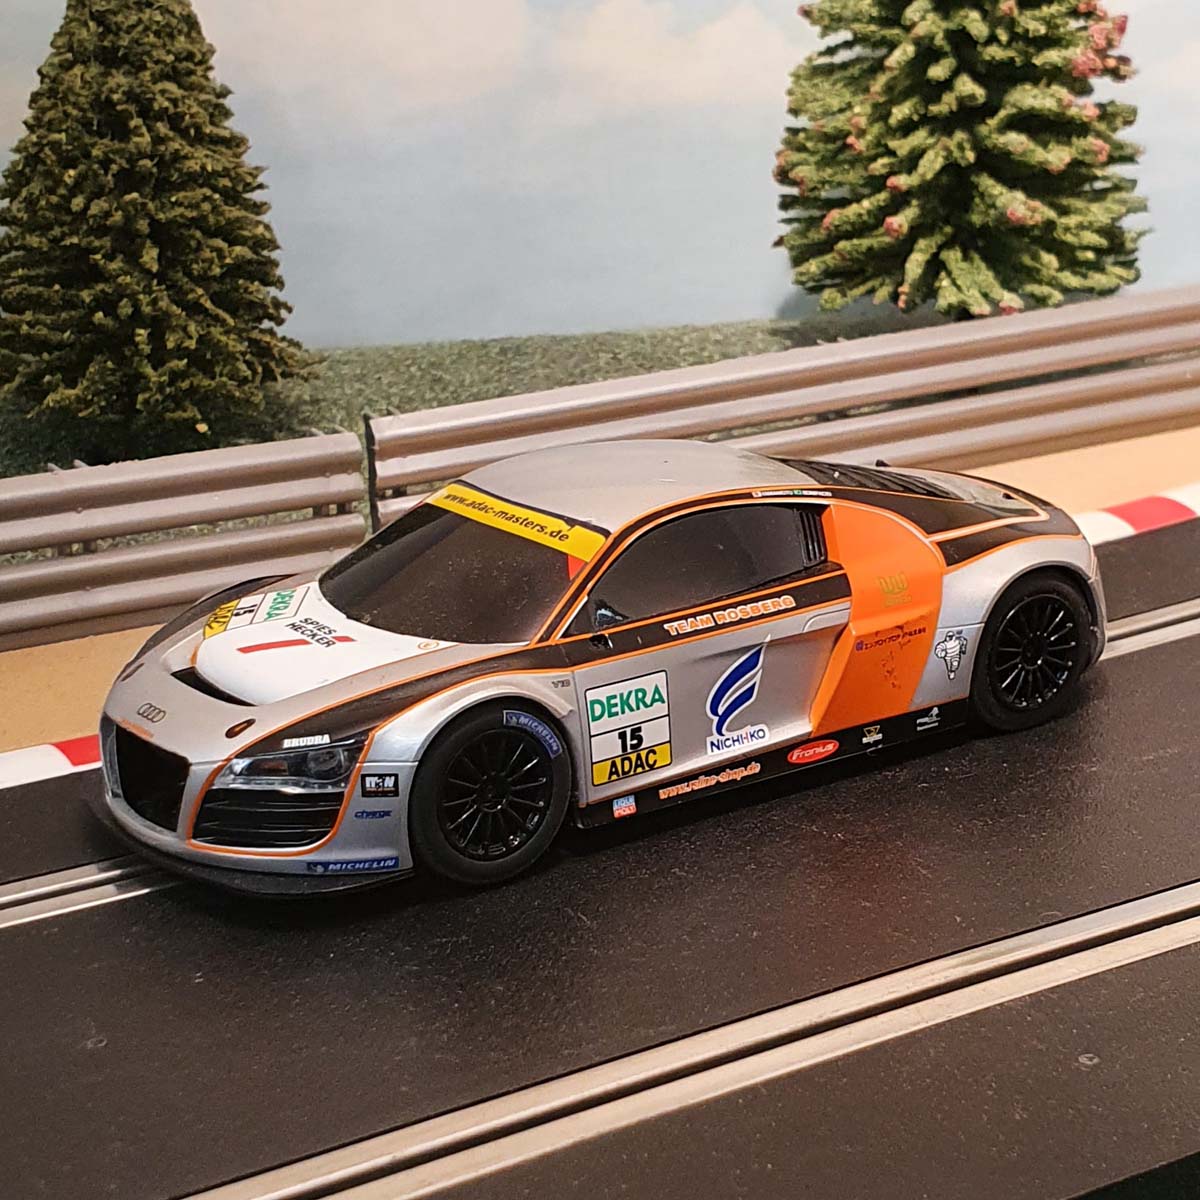 Coche Scalextric 1:32 - C3134 Audi R8 LMS GT3 Equipo Rosberg #15 #GWMS